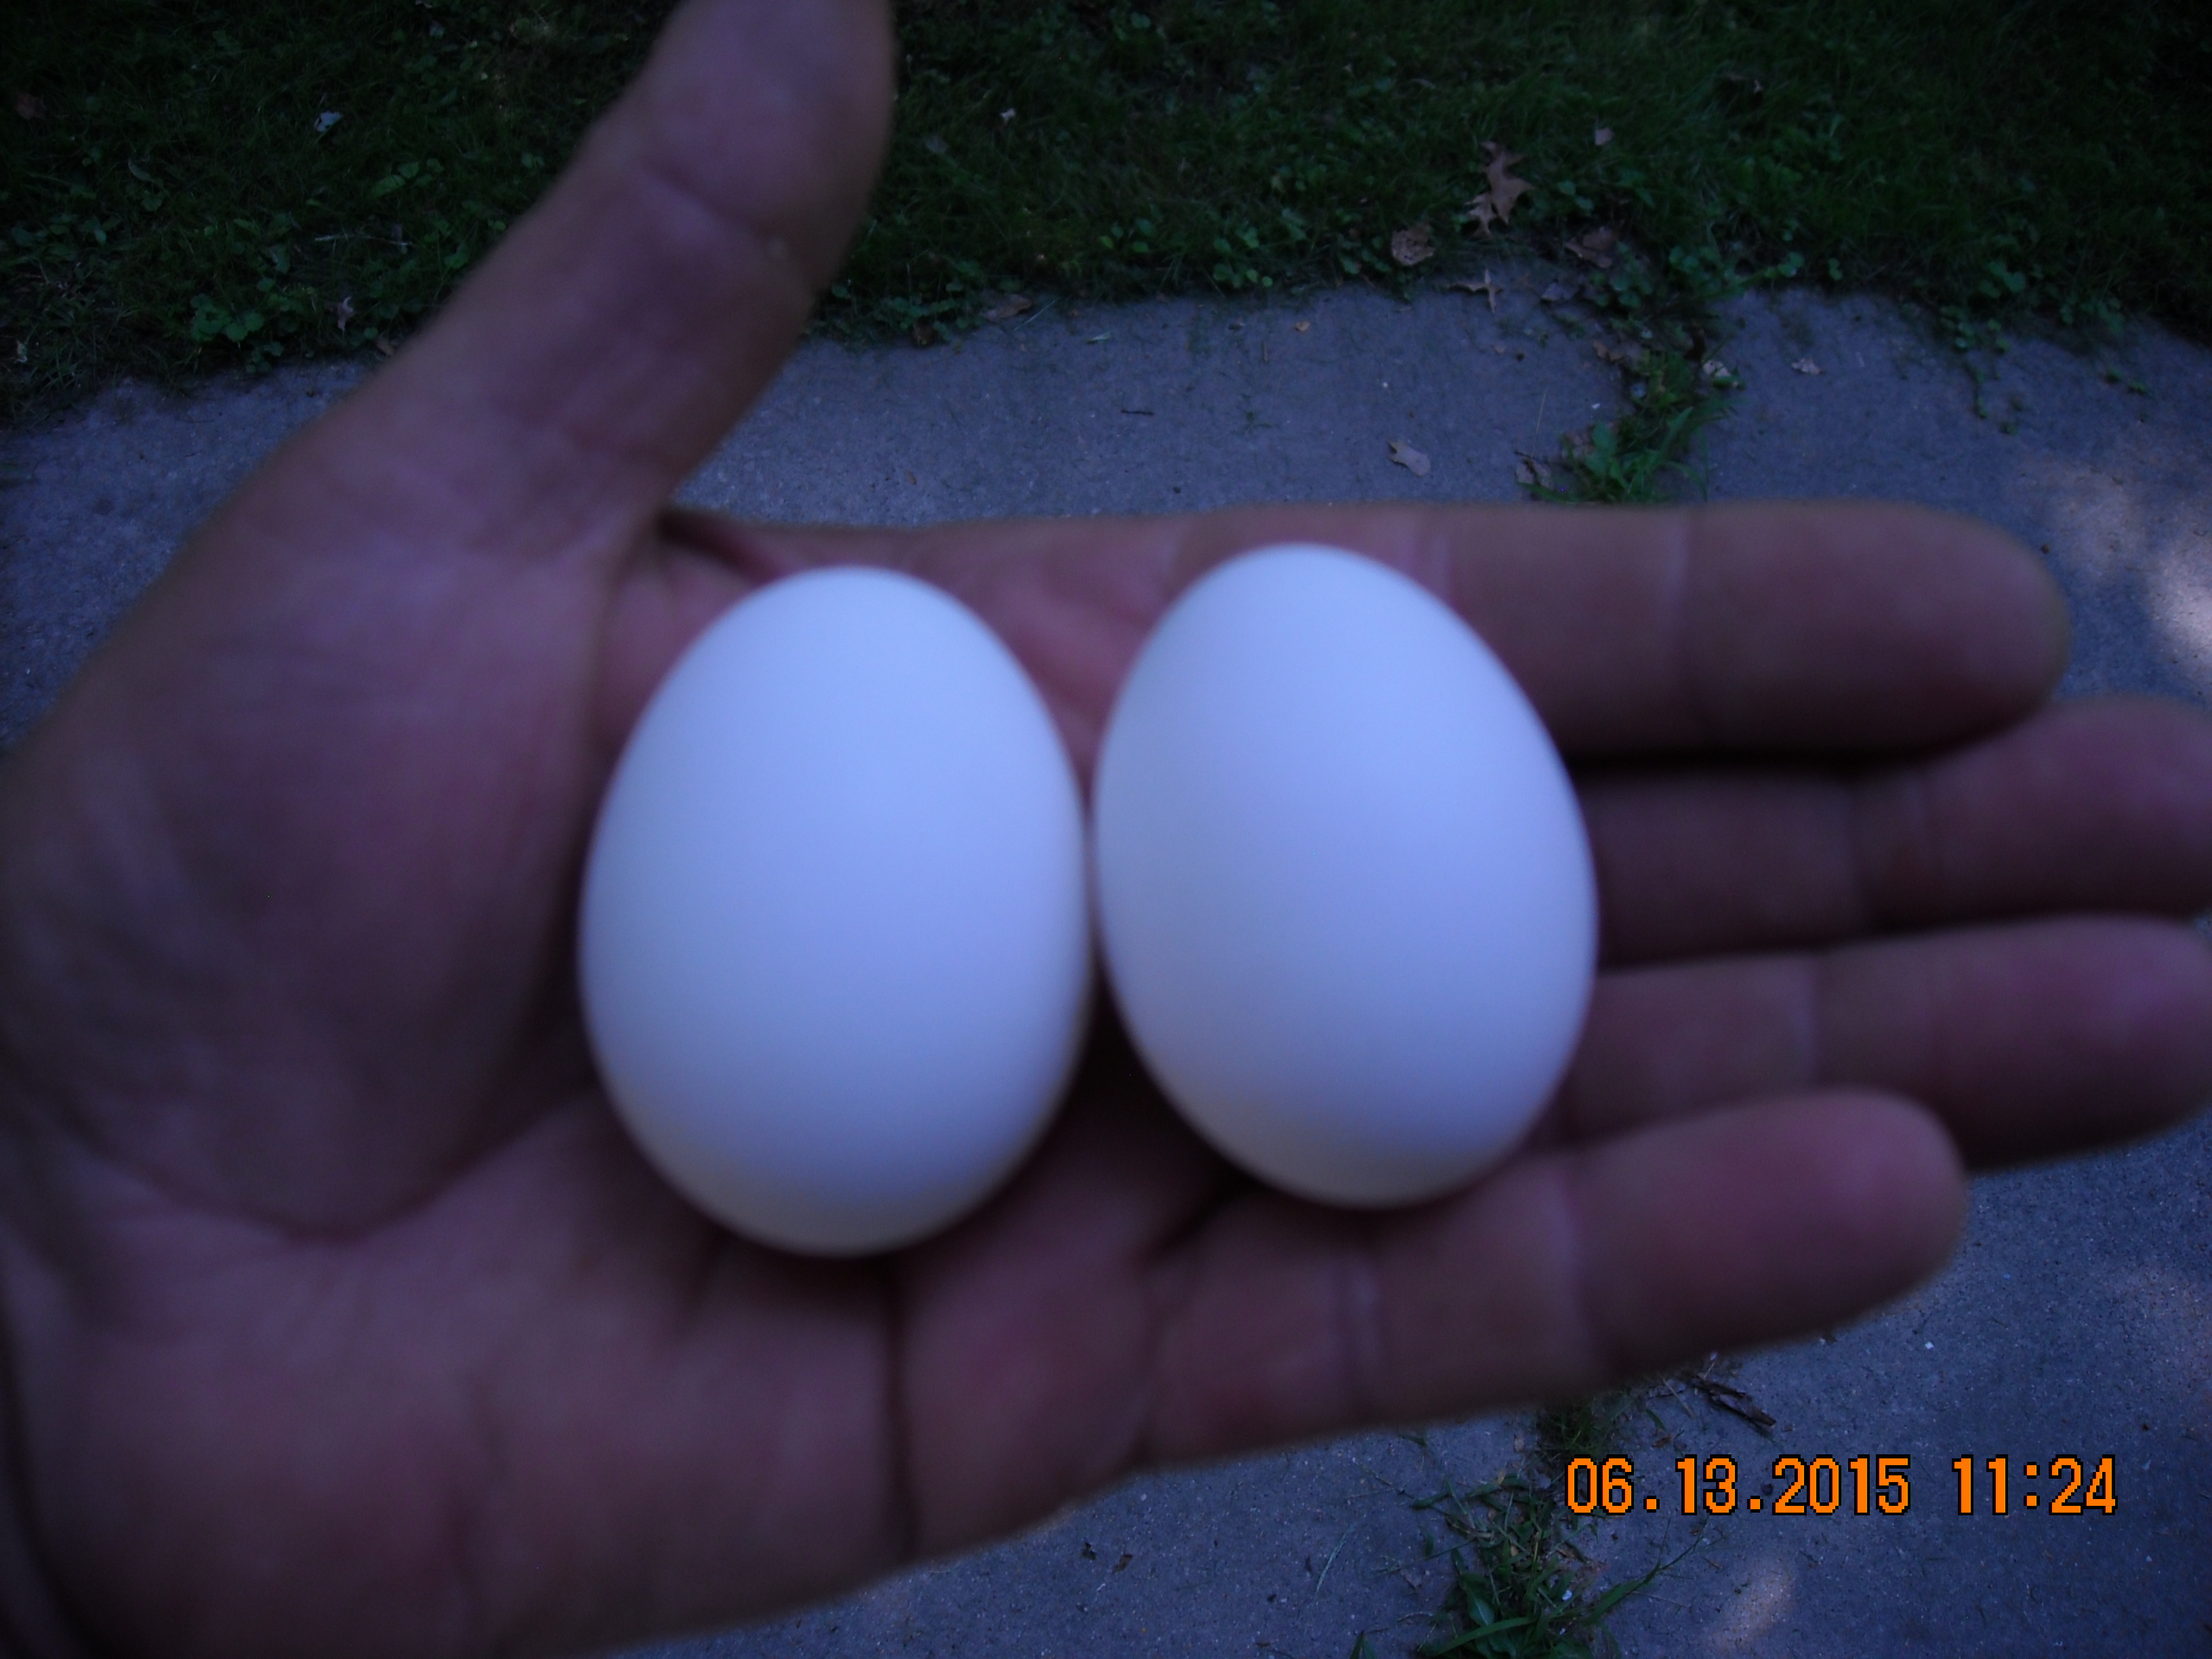 My white leghorn started laying 08-20-2015
at 16 weeks old.